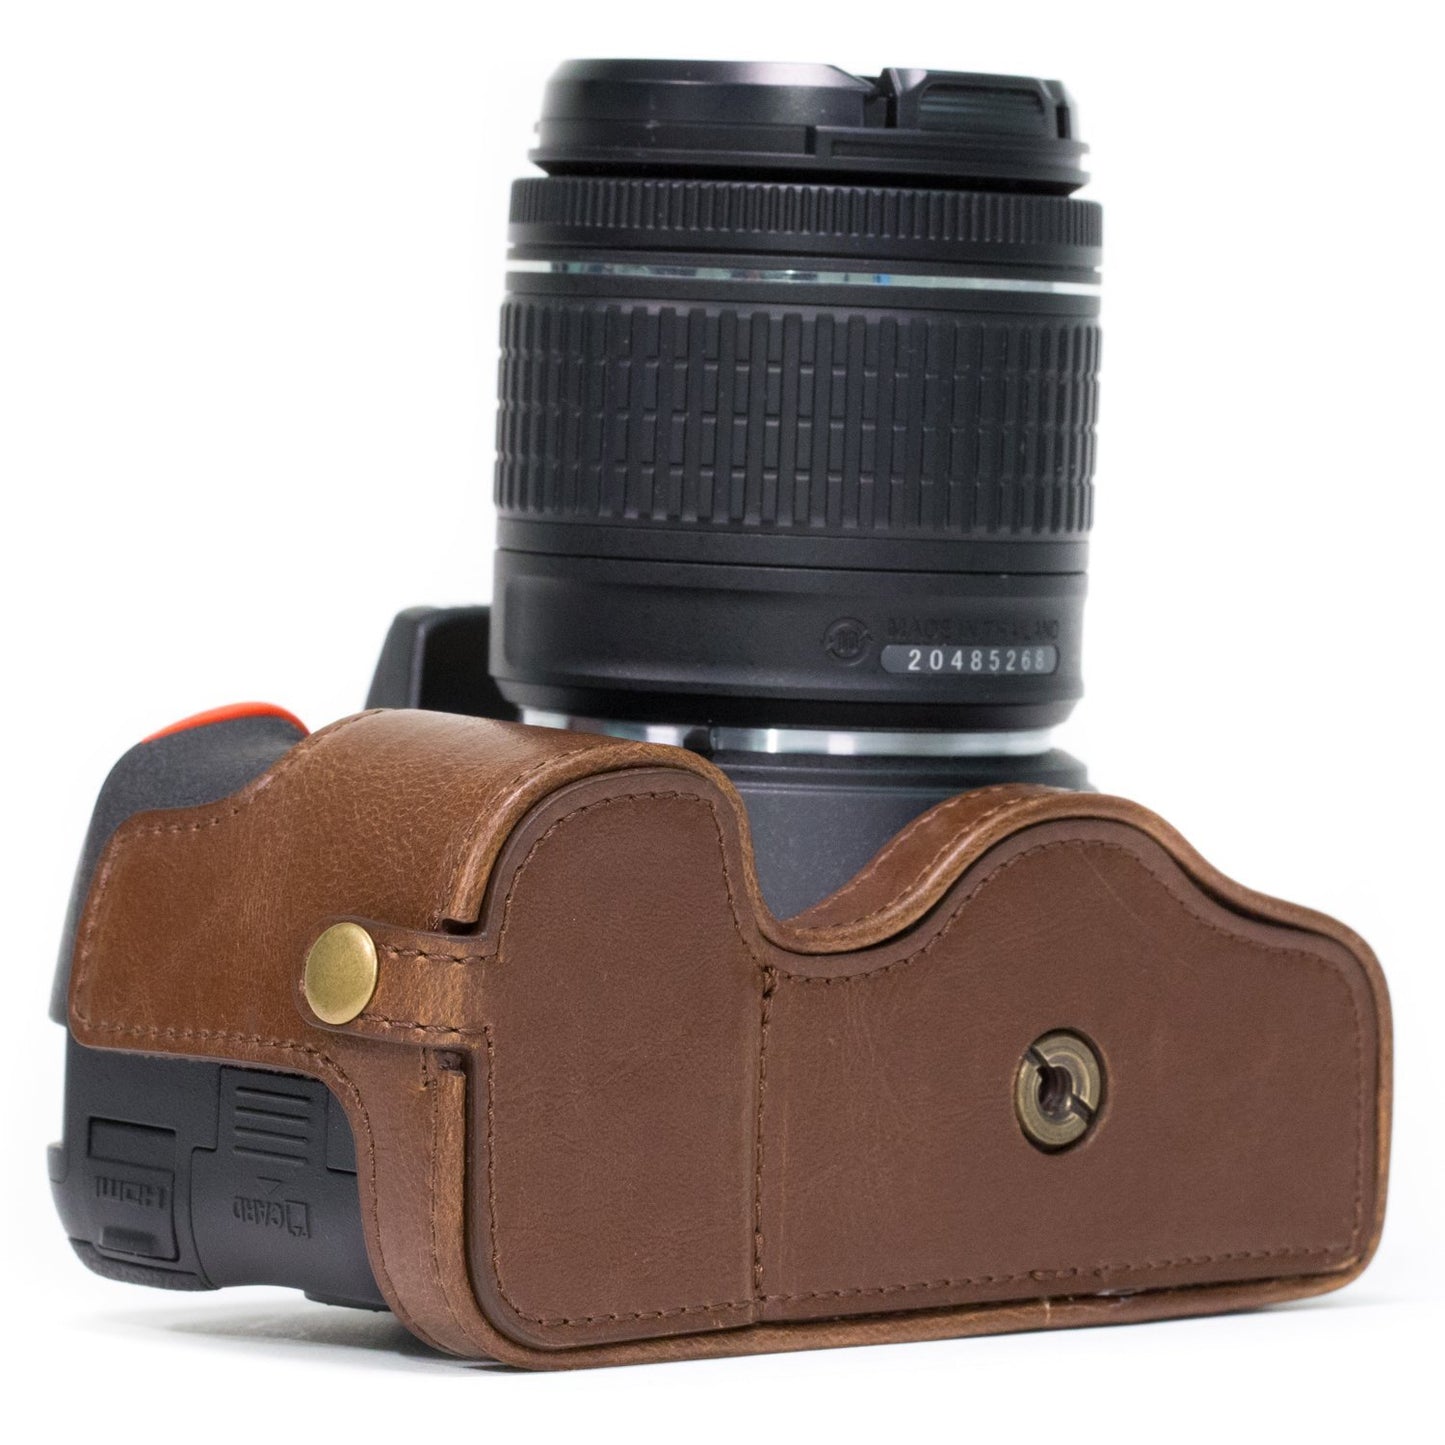 MegaGear Nikon D5600, D5500 Ever Ready Leather Camera Half Case and Strap, with Battery Access - Dark Brown - MG1171